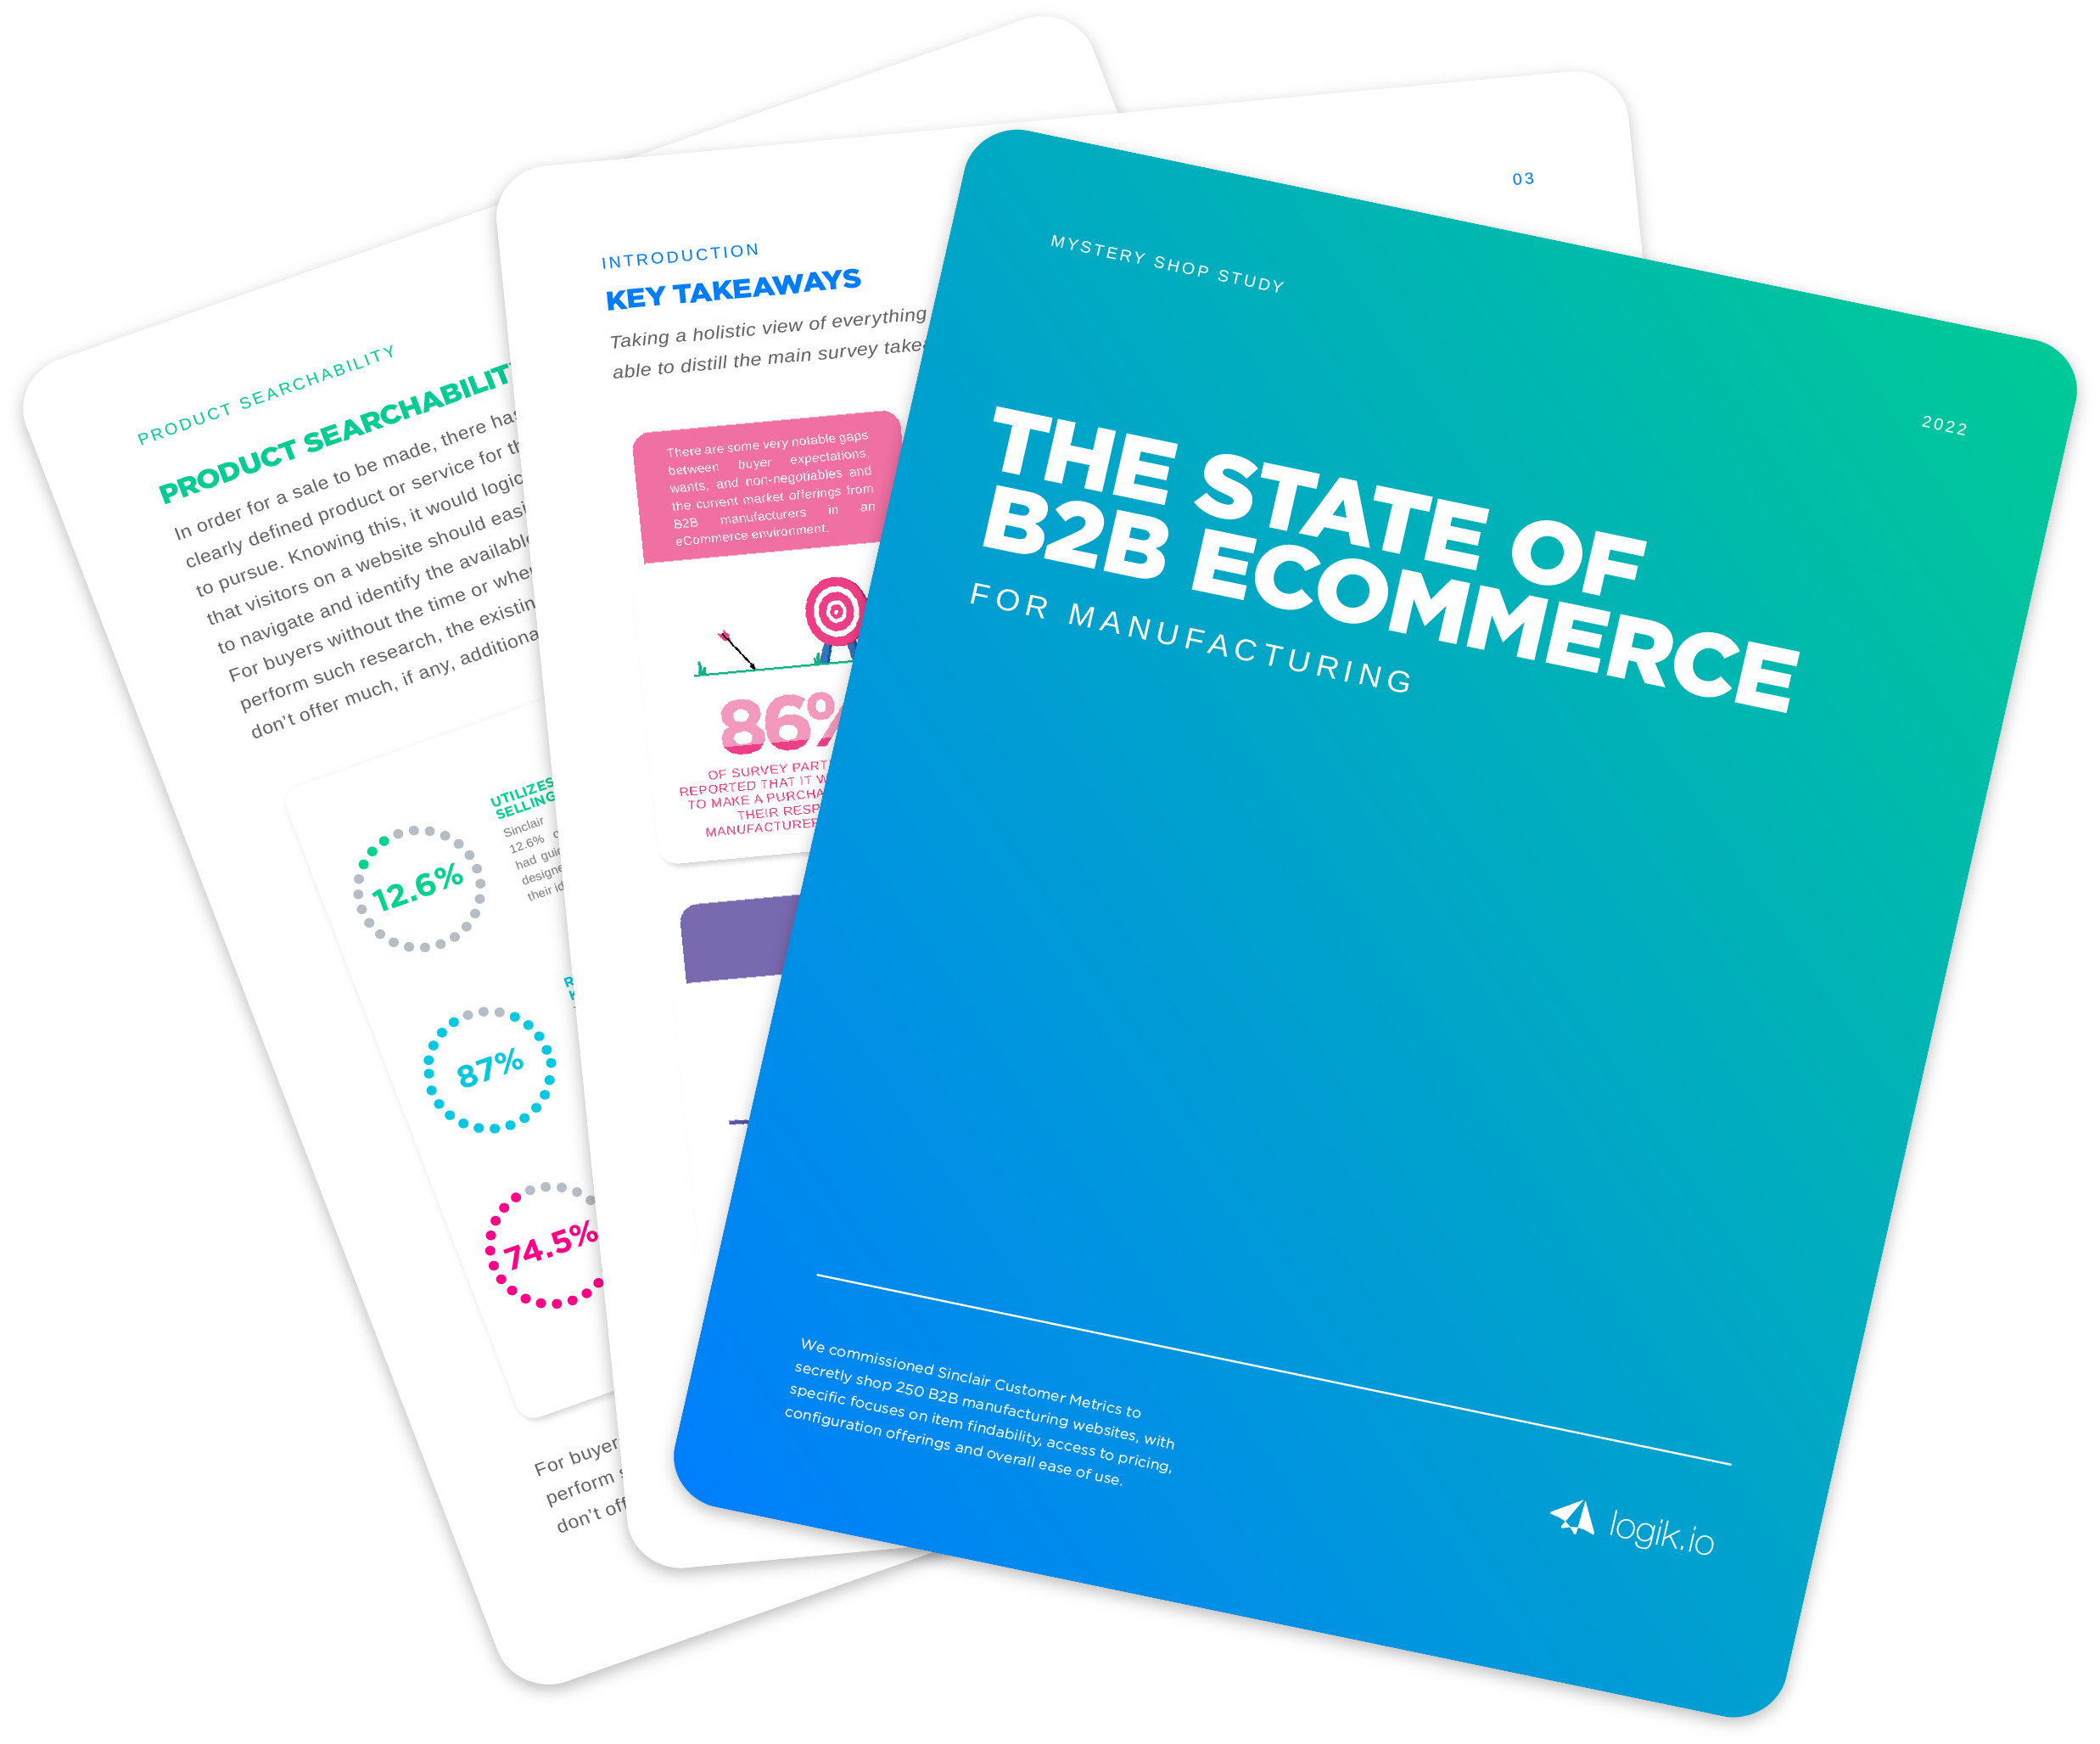 The State of B2B E-Commerce for Manufacturers